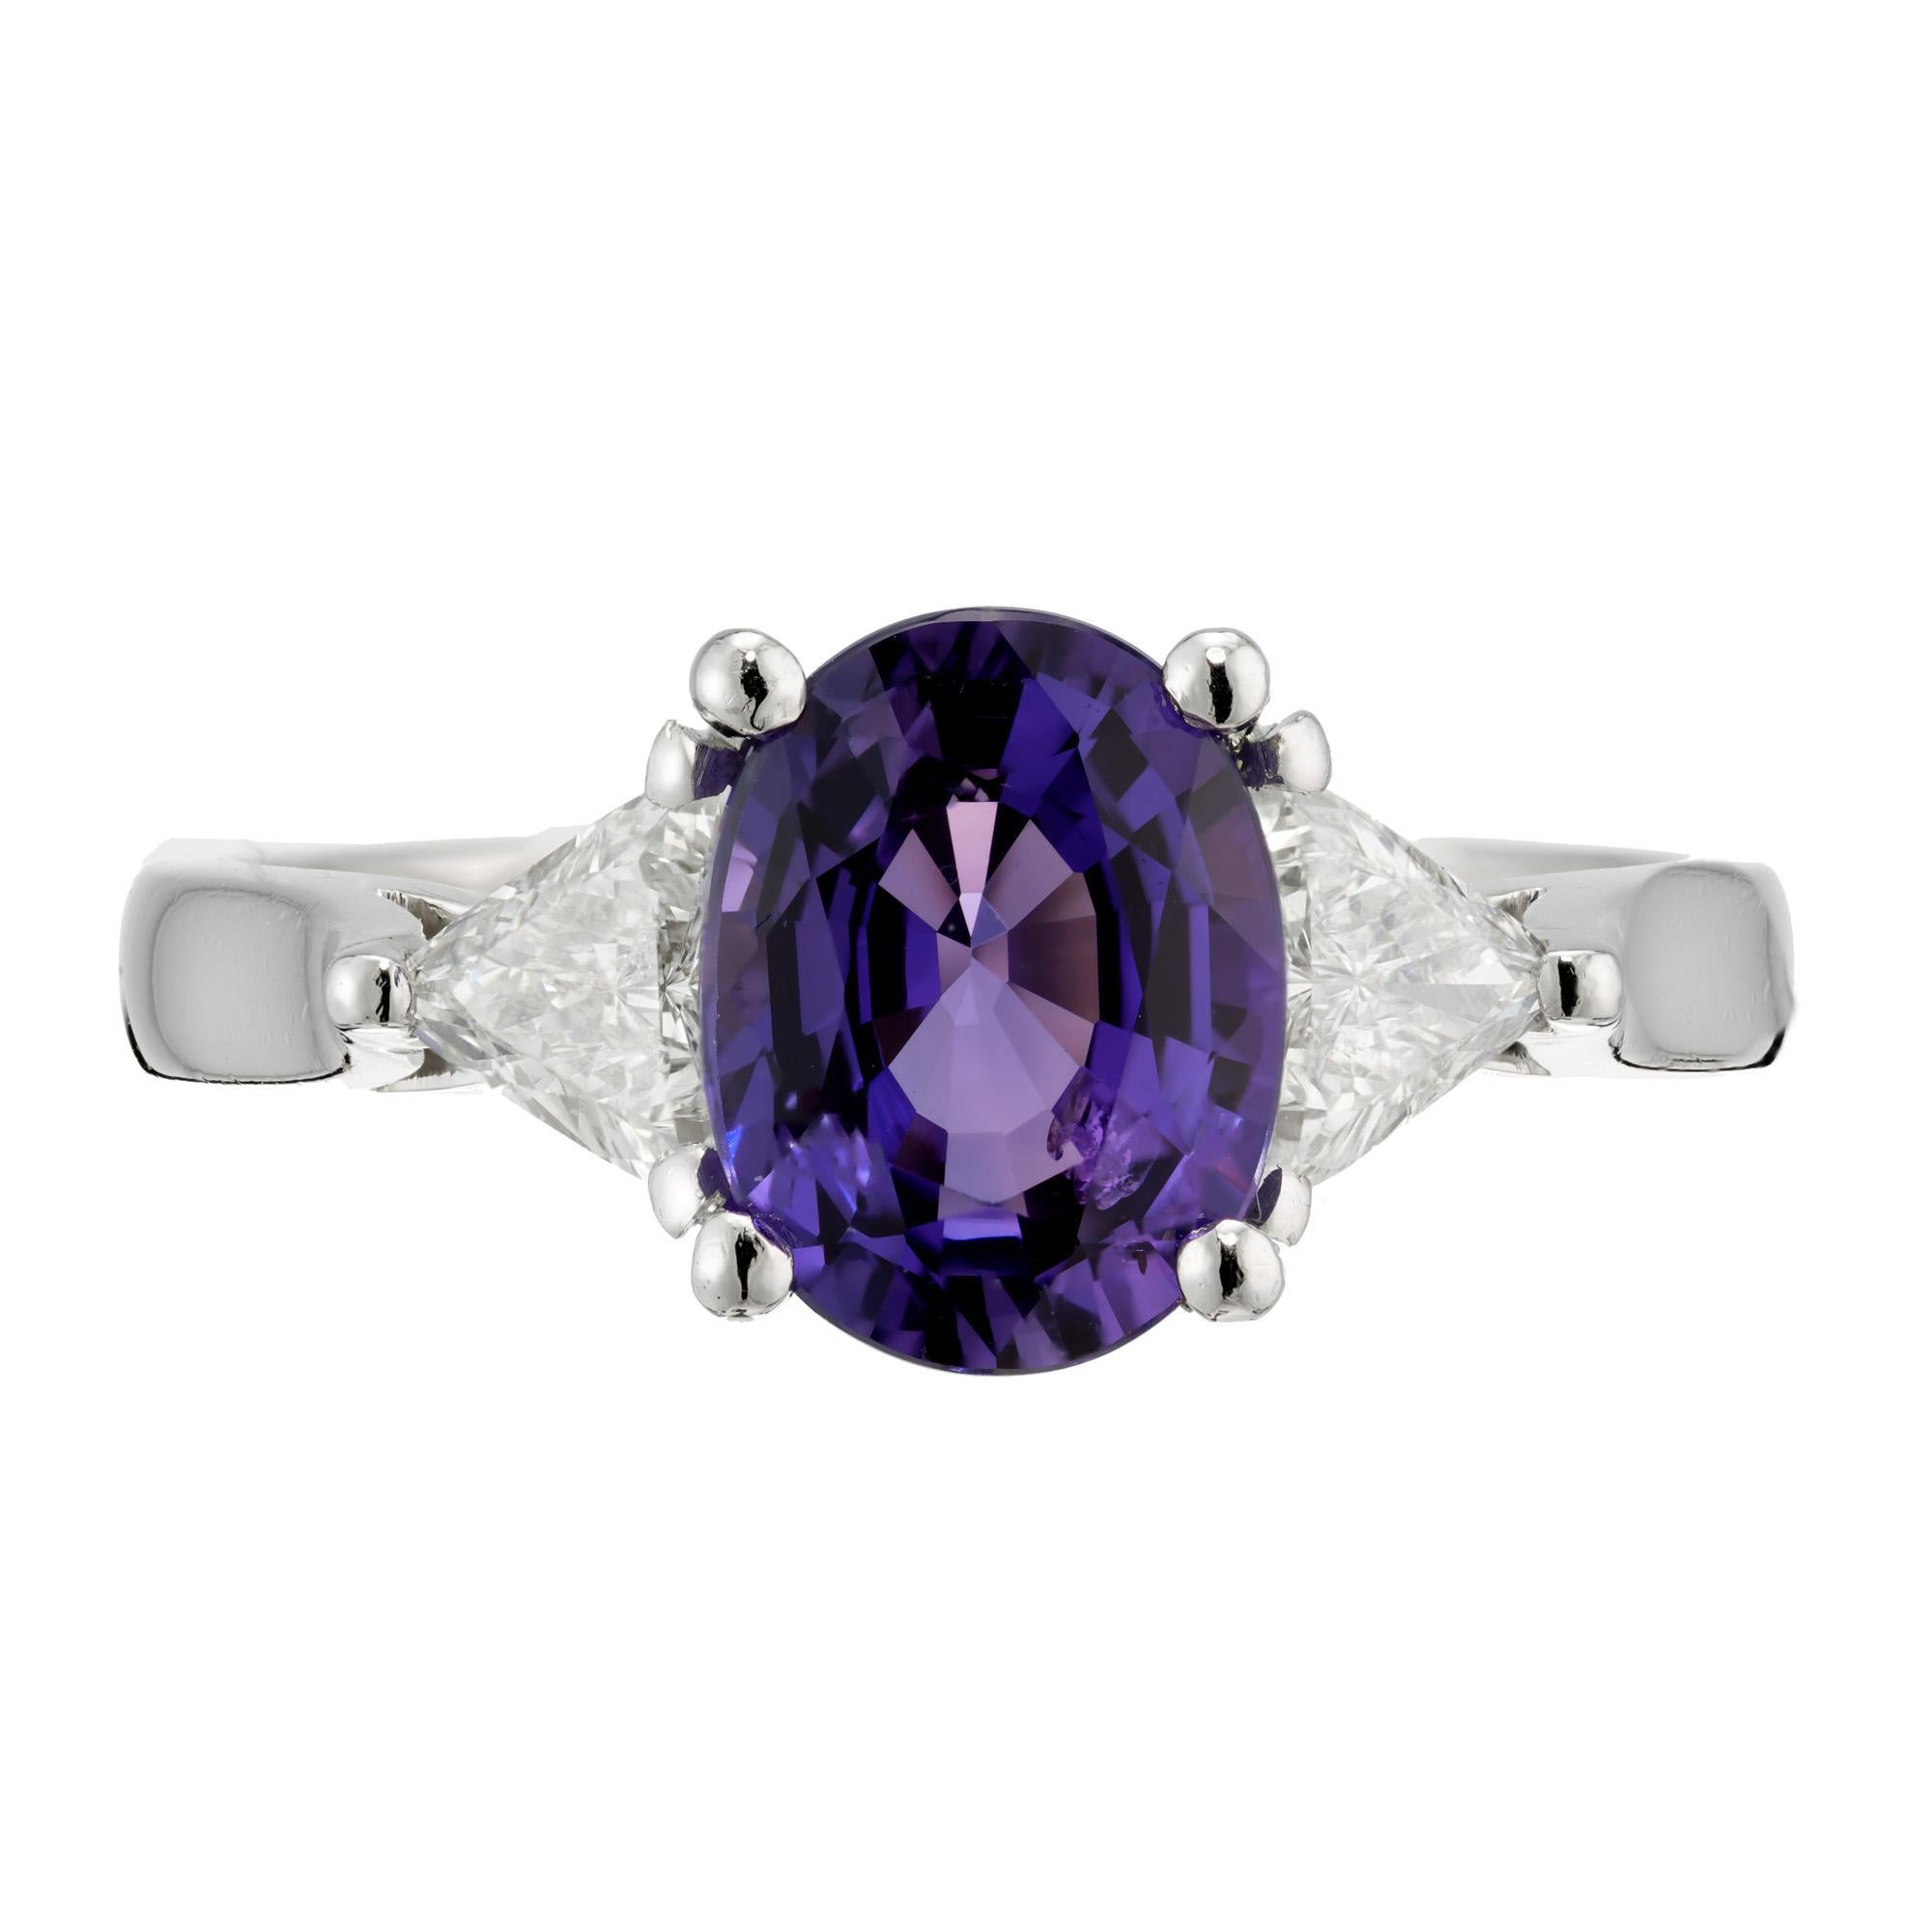 Purple sapphire and diamond engagement ring. AGL certified 2.65cts oval center stone, set in a platinum three-stone setting with two trilliant cut side diamonds.  Sapphire is certified as natural, no heat . Violet purple sapphire. The stone is Circa